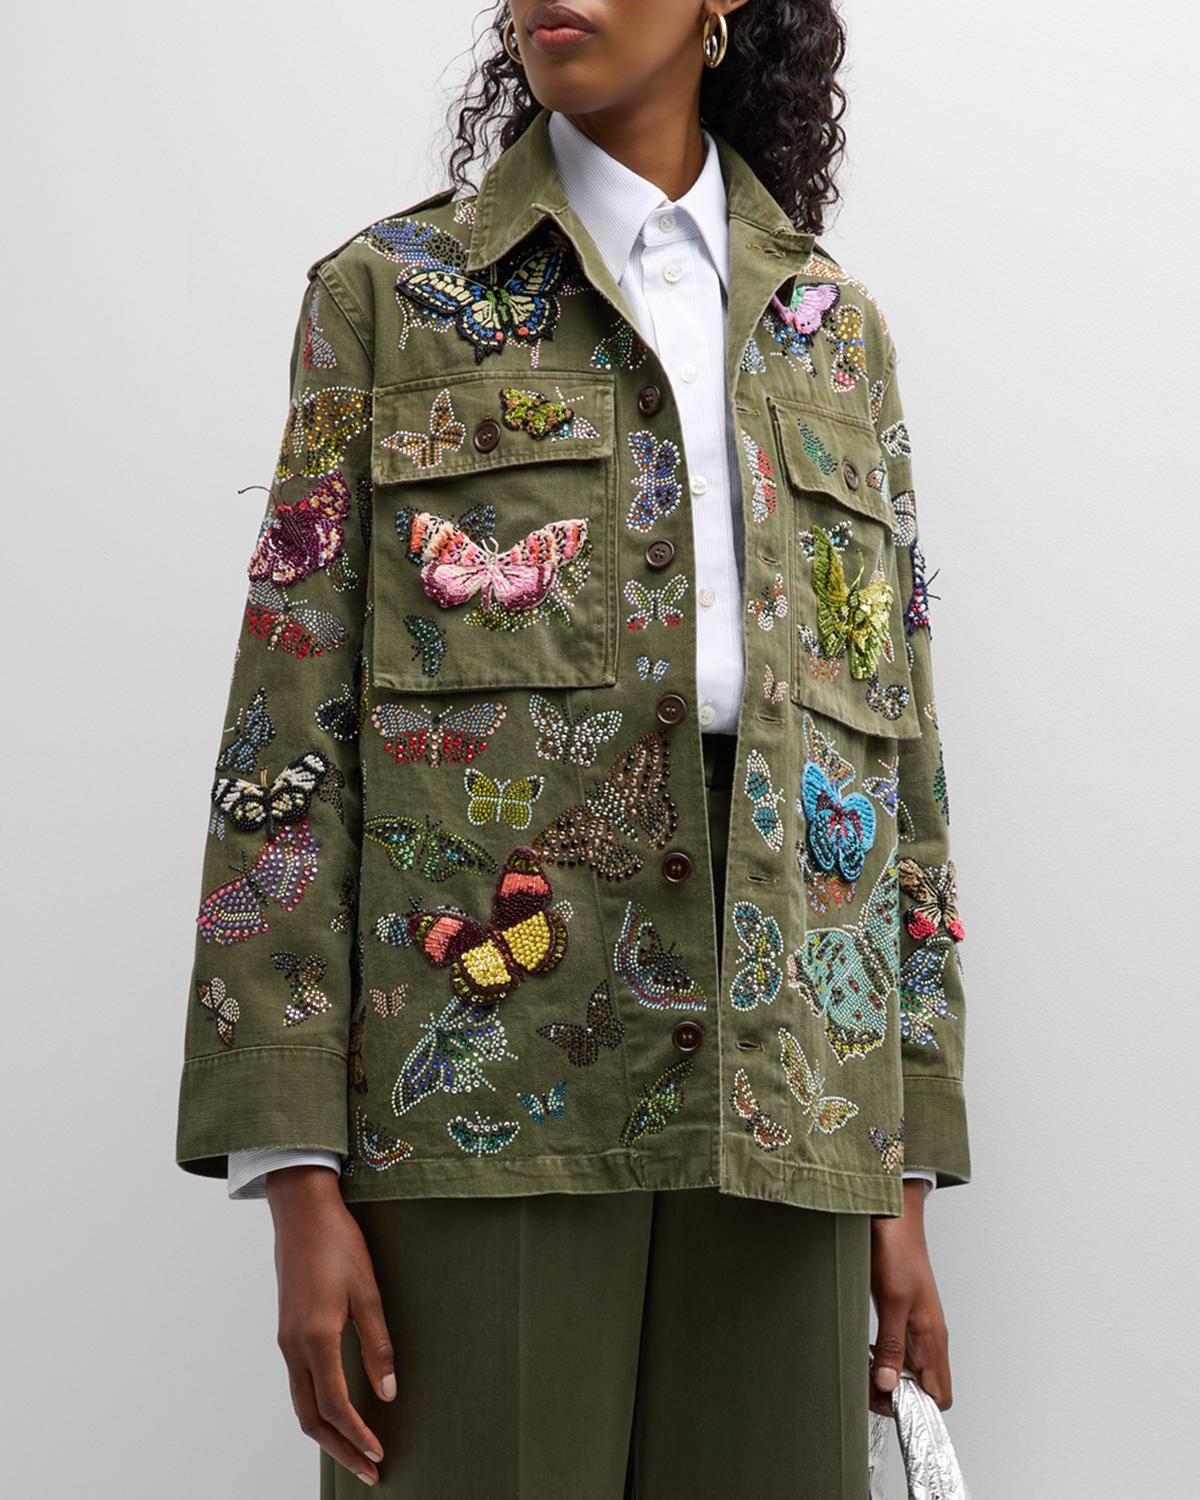 LIBERTINE MILLIONS OF BUTTERFLIES VINTAGE FRENCH MILITARY JACKET